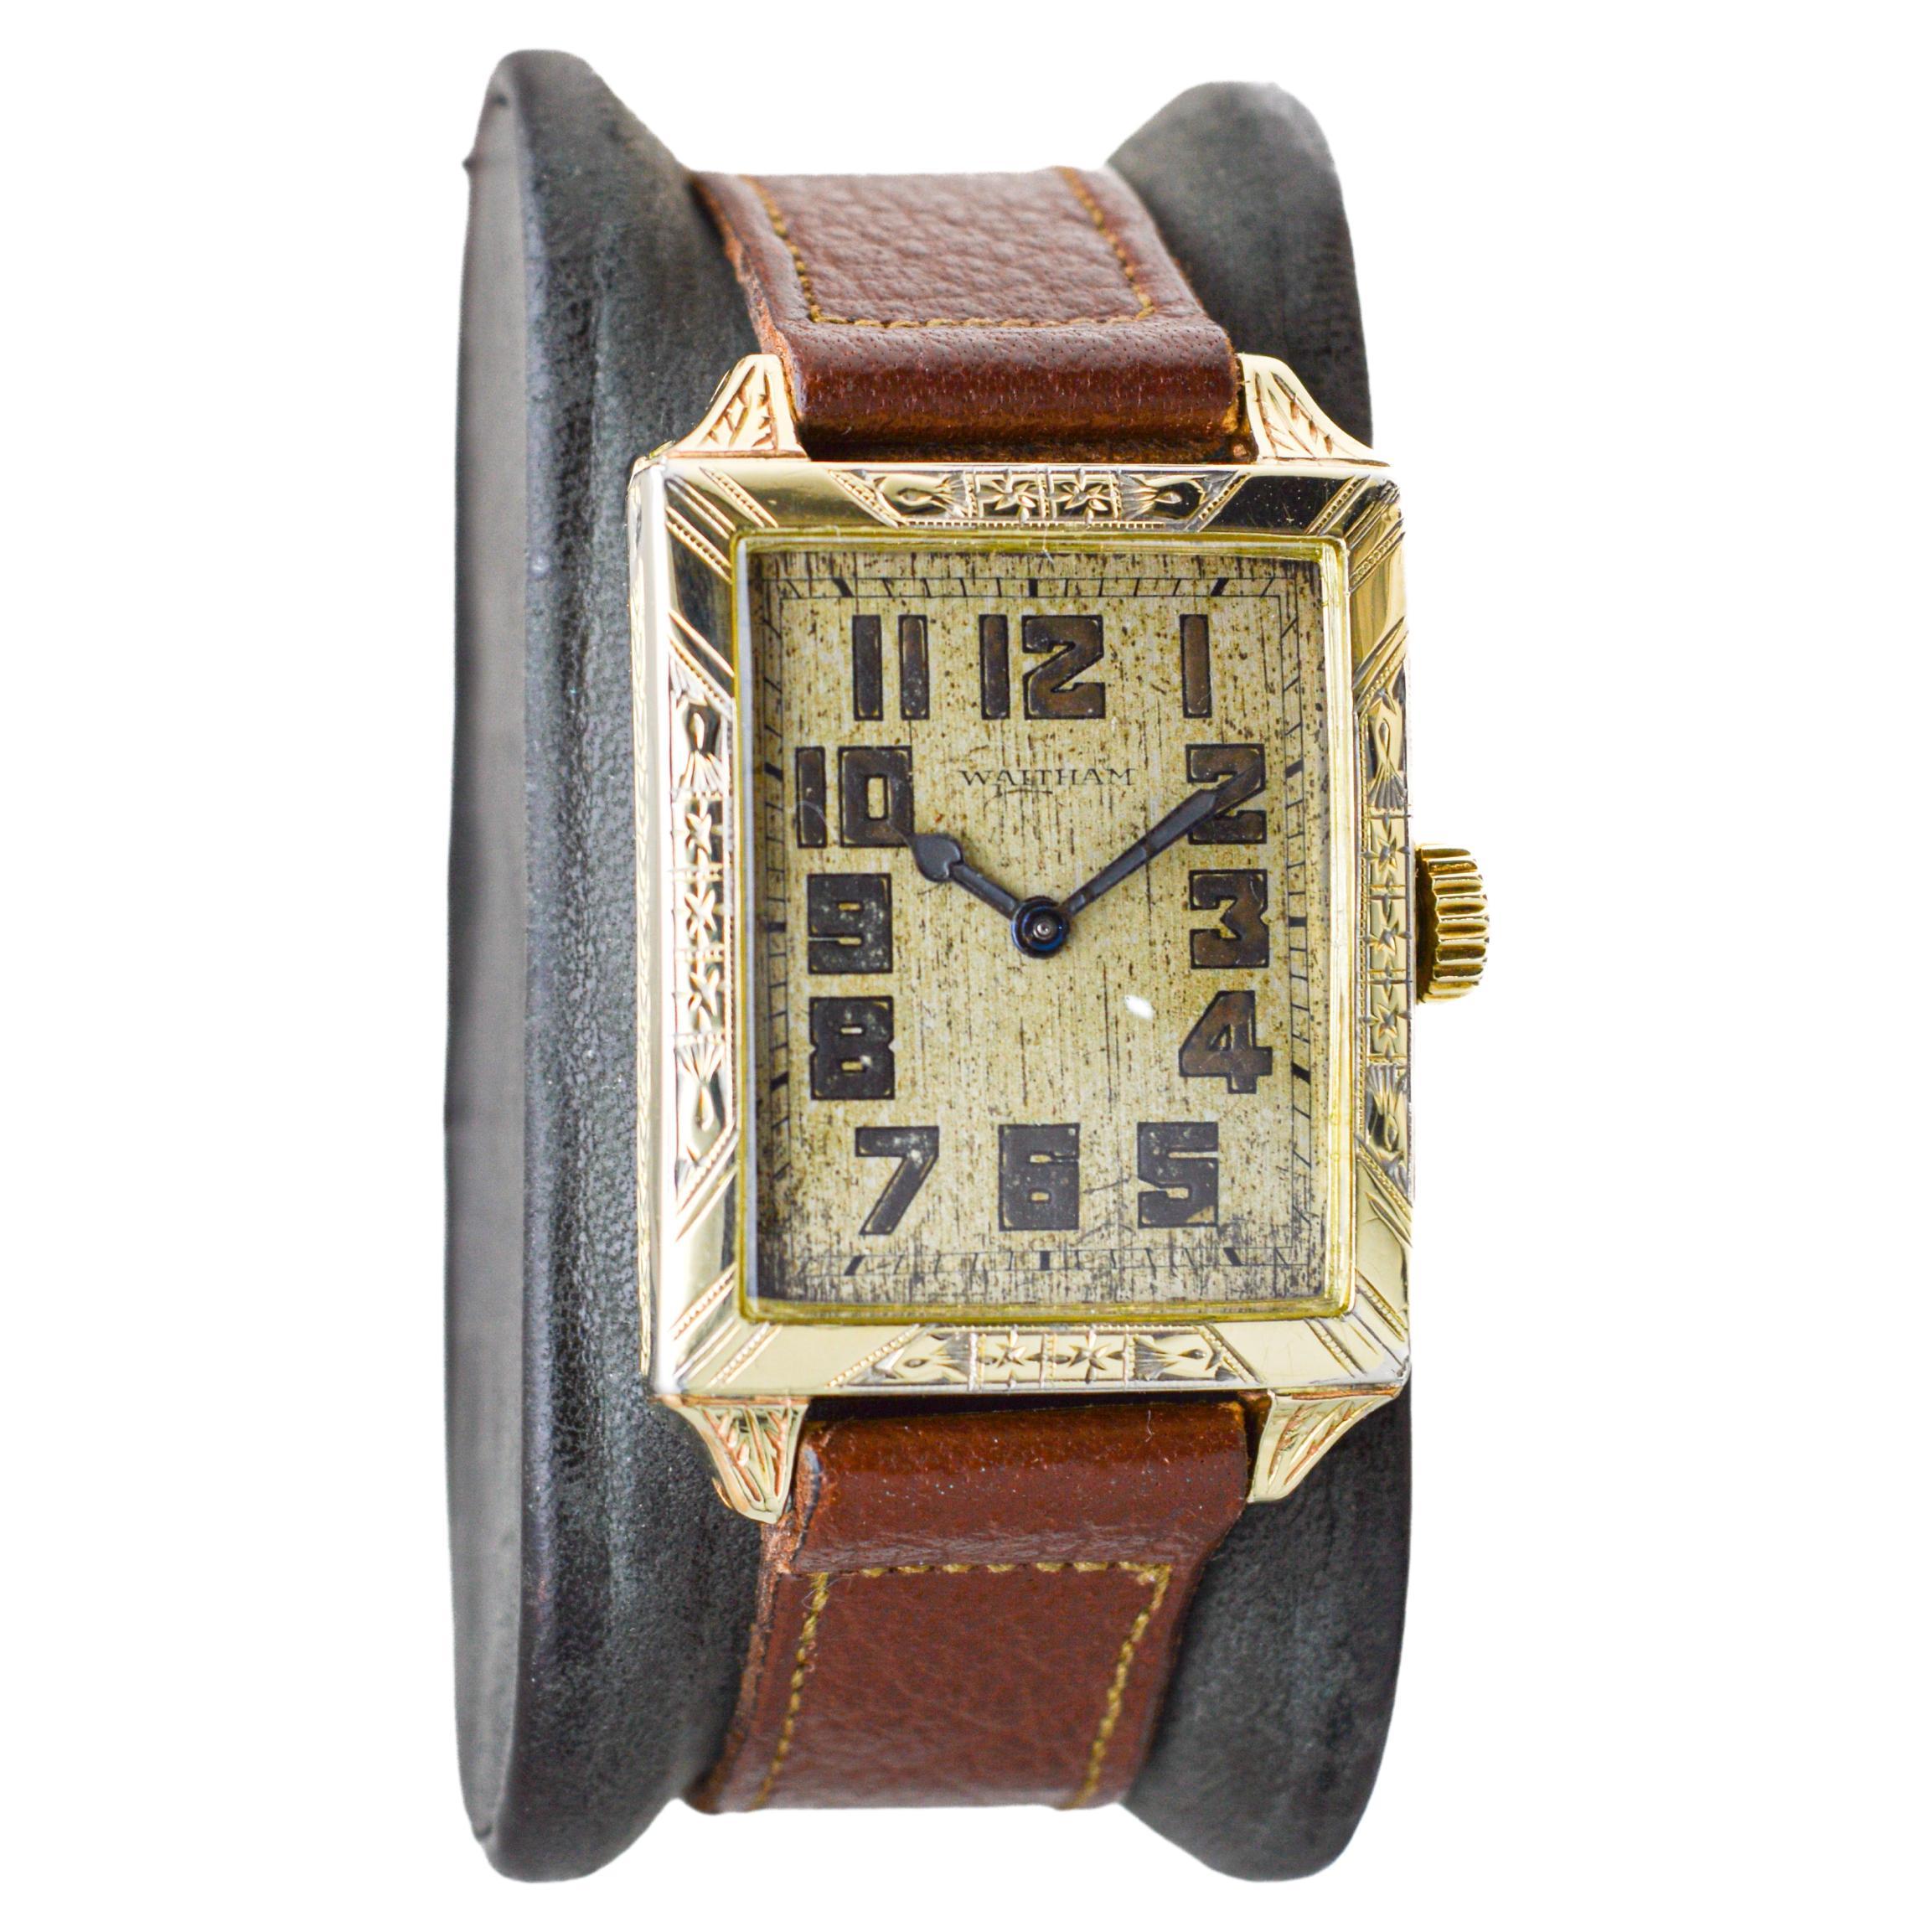 FACTORY / HOUSE: Waltham Watch Company
STYLE / REFERENCE: Art Deco / Tank Style 
METAL / MATERIAL: Yellow Gold-Filled
CIRCA / YEAR: 1926
DIMENSIONS / SIZE: Length 41mm X Width 27mm
MOVEMENT / CALIBER: Manual Winding / 7 Jewels / Caliber 2-ot
DIAL /